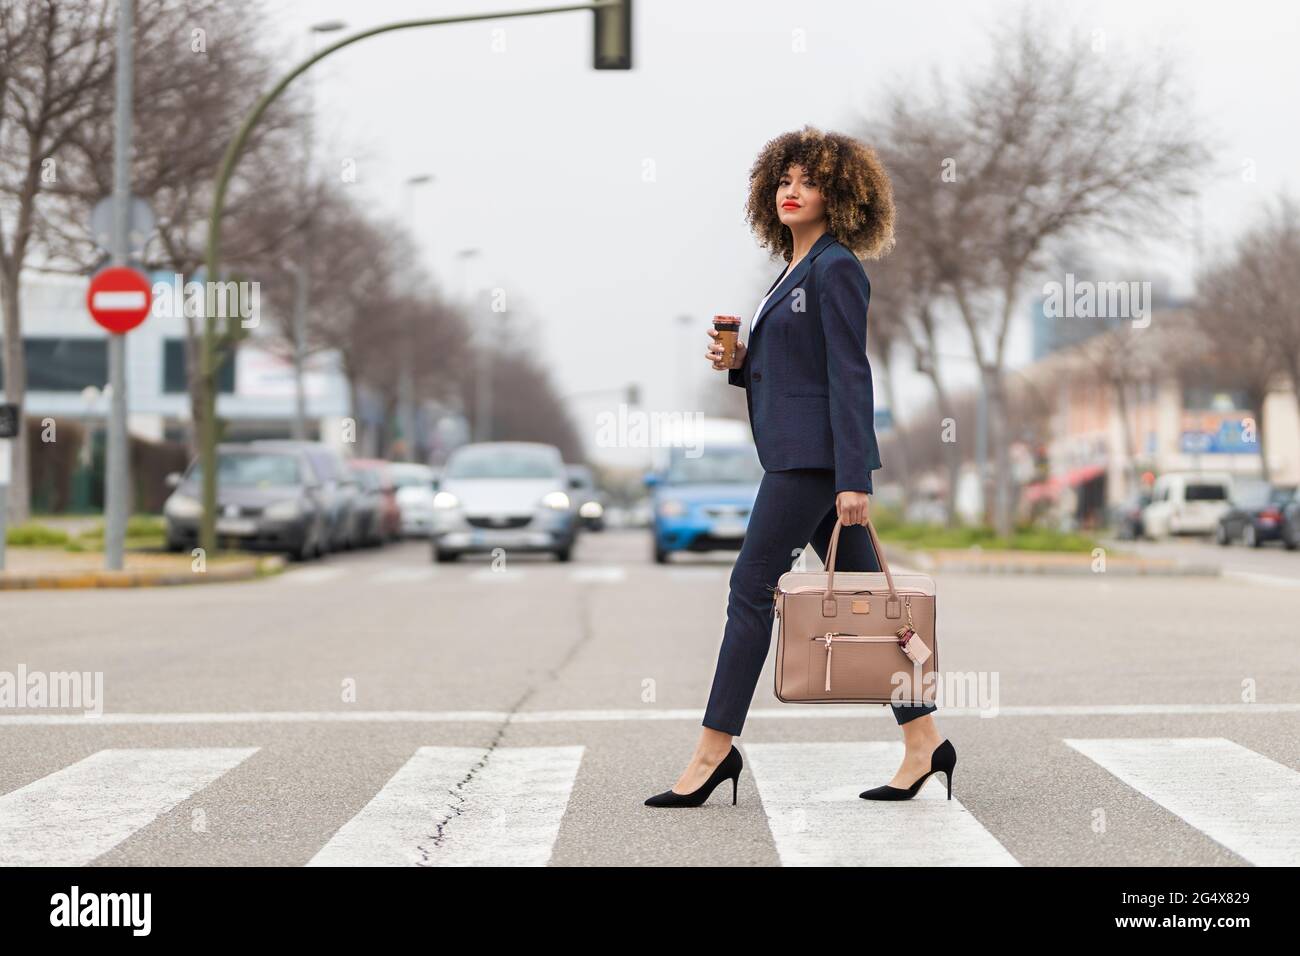 Well-dressed businesswoman with purse crossing road in city Stock Photo